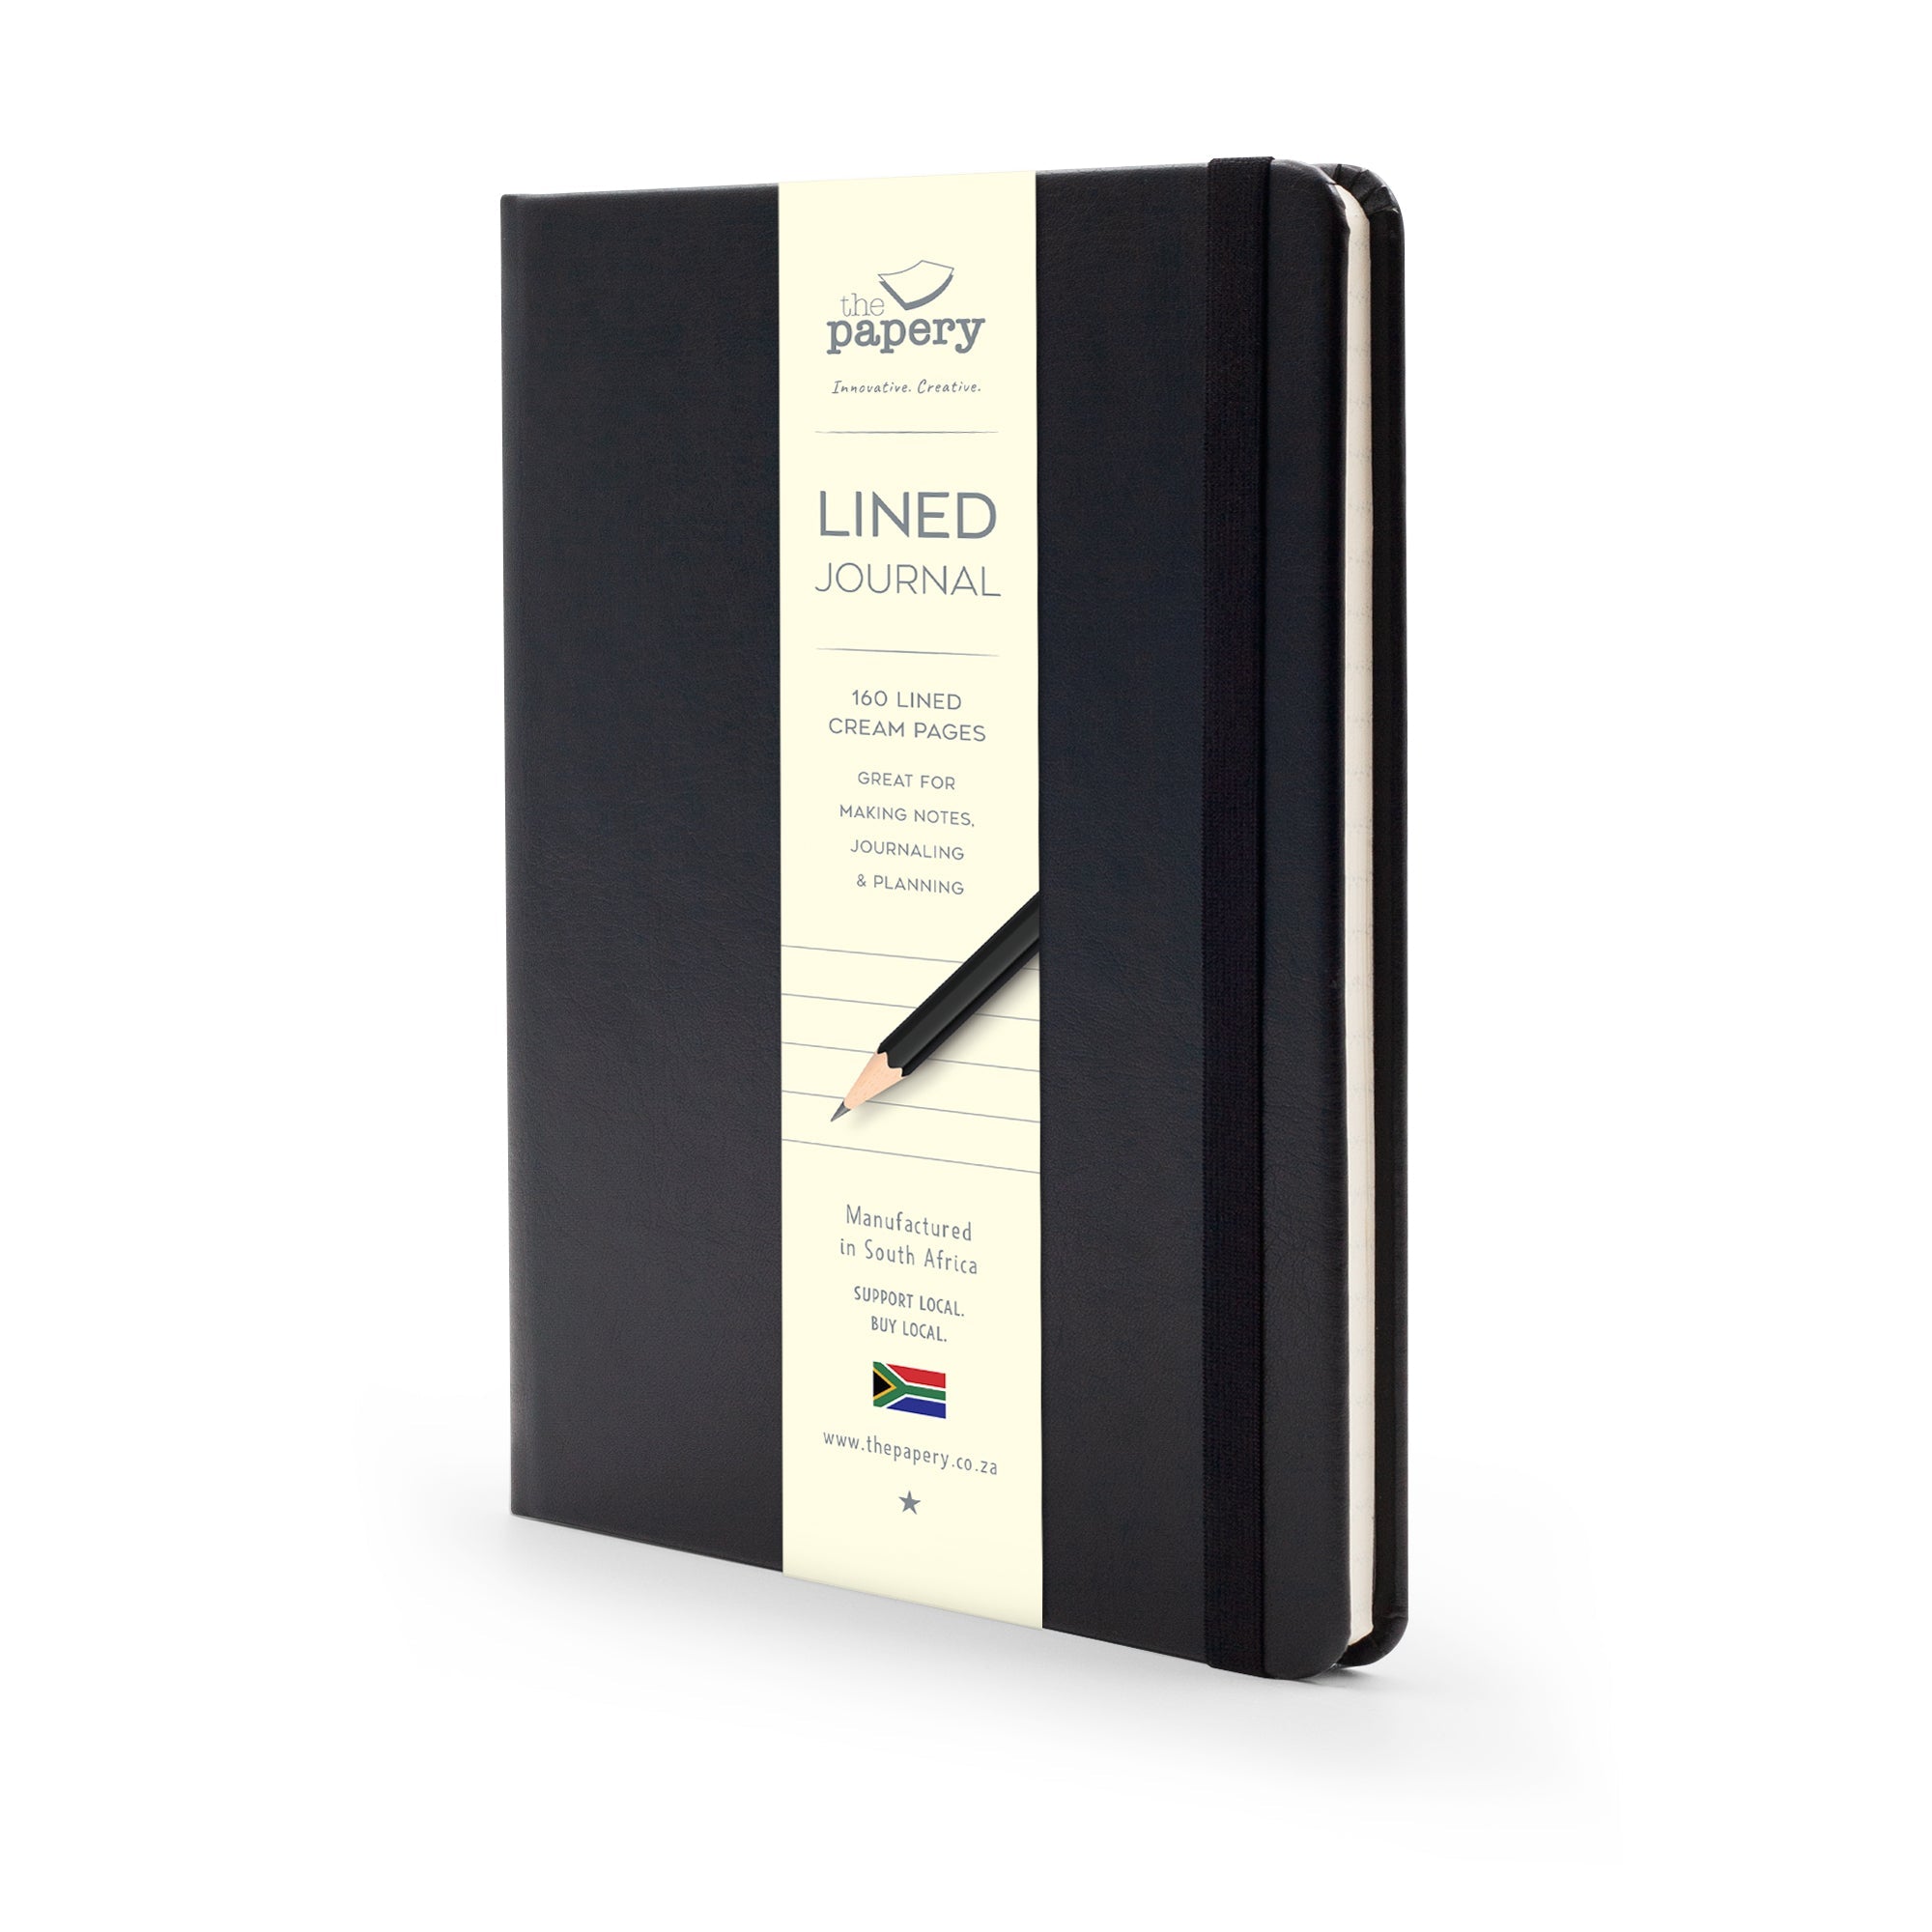 Image shows a Black lined Classic hardcover journal